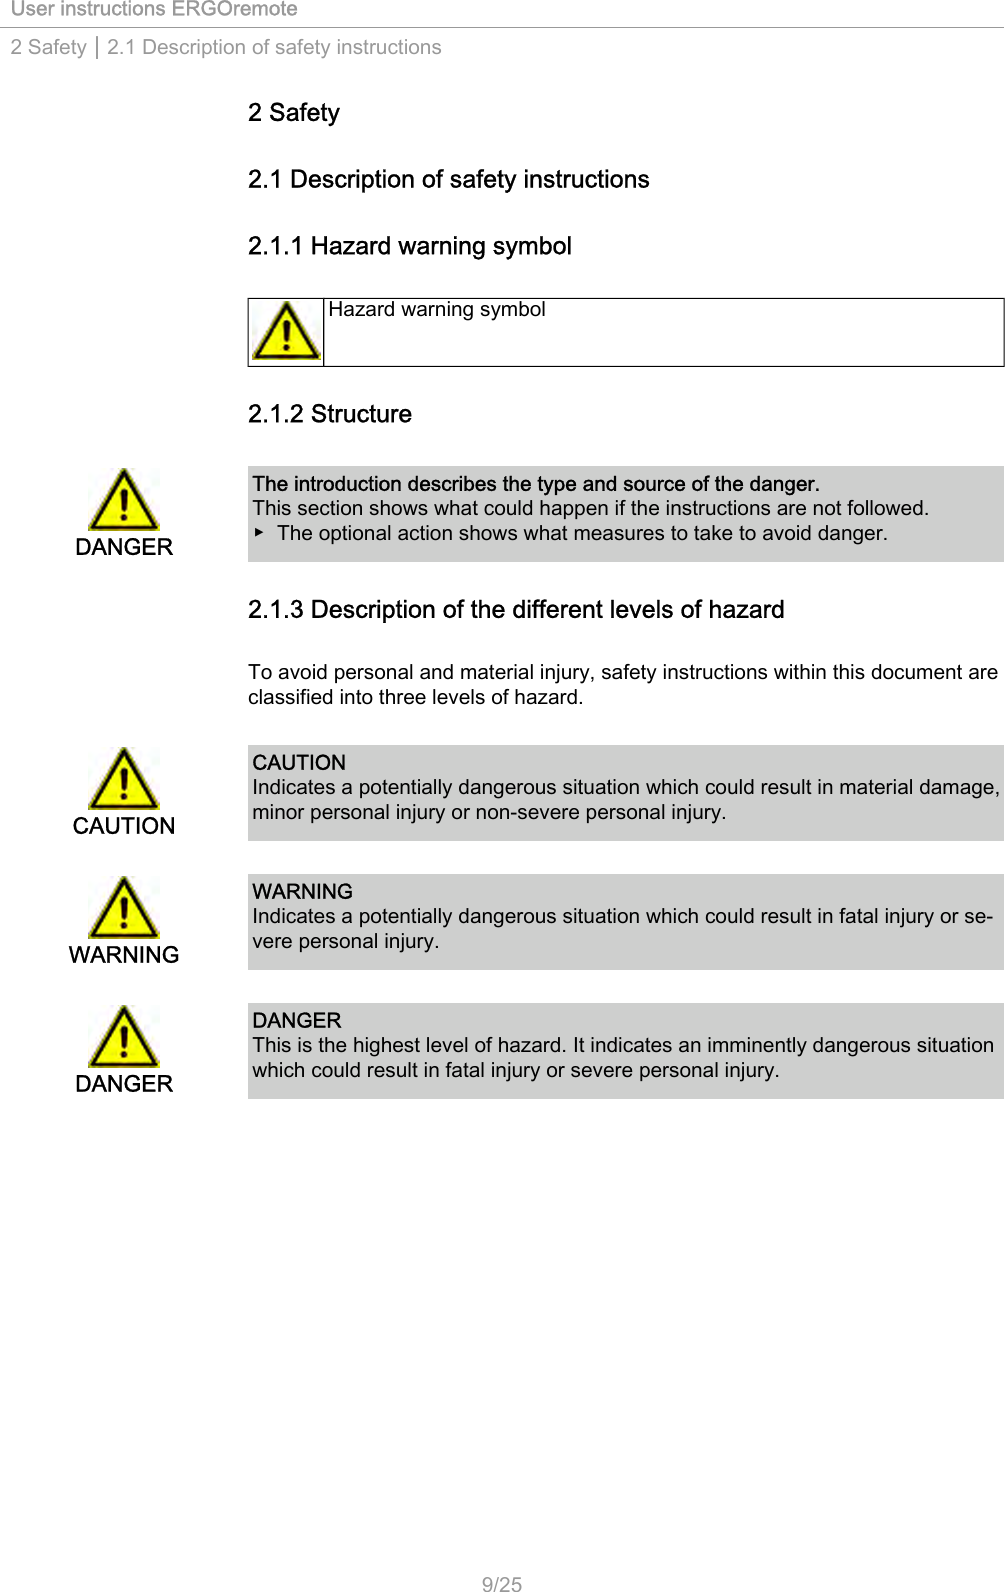 User instructions ERGOremote2 Safety | 2.1 Description of safety instructions2 Safety2.1 Description of safety instructions2.1.1 Hazard warning symbolHazard warning symbol2.1.2 StructureDANGERThe introduction describes the type and source of the danger.This section shows what could happen if the instructions are not followed.▶ The optional action shows what measures to take to avoid danger.2.1.3 Description of the different levels of hazardTo avoid personal and material injury, safety instructions within this document areclassified into three levels of hazard.CAUTIONCAUTIONIndicates a potentially dangerous situation which could result in material damage,minor personal injury or non-severe personal injury.WARNINGWARNINGIndicates a potentially dangerous situation which could result in fatal injury or se‐vere personal injury.DANGERDANGERThis is the highest level of hazard. It indicates an imminently dangerous situationwhich could result in fatal injury or severe personal injury.9/25